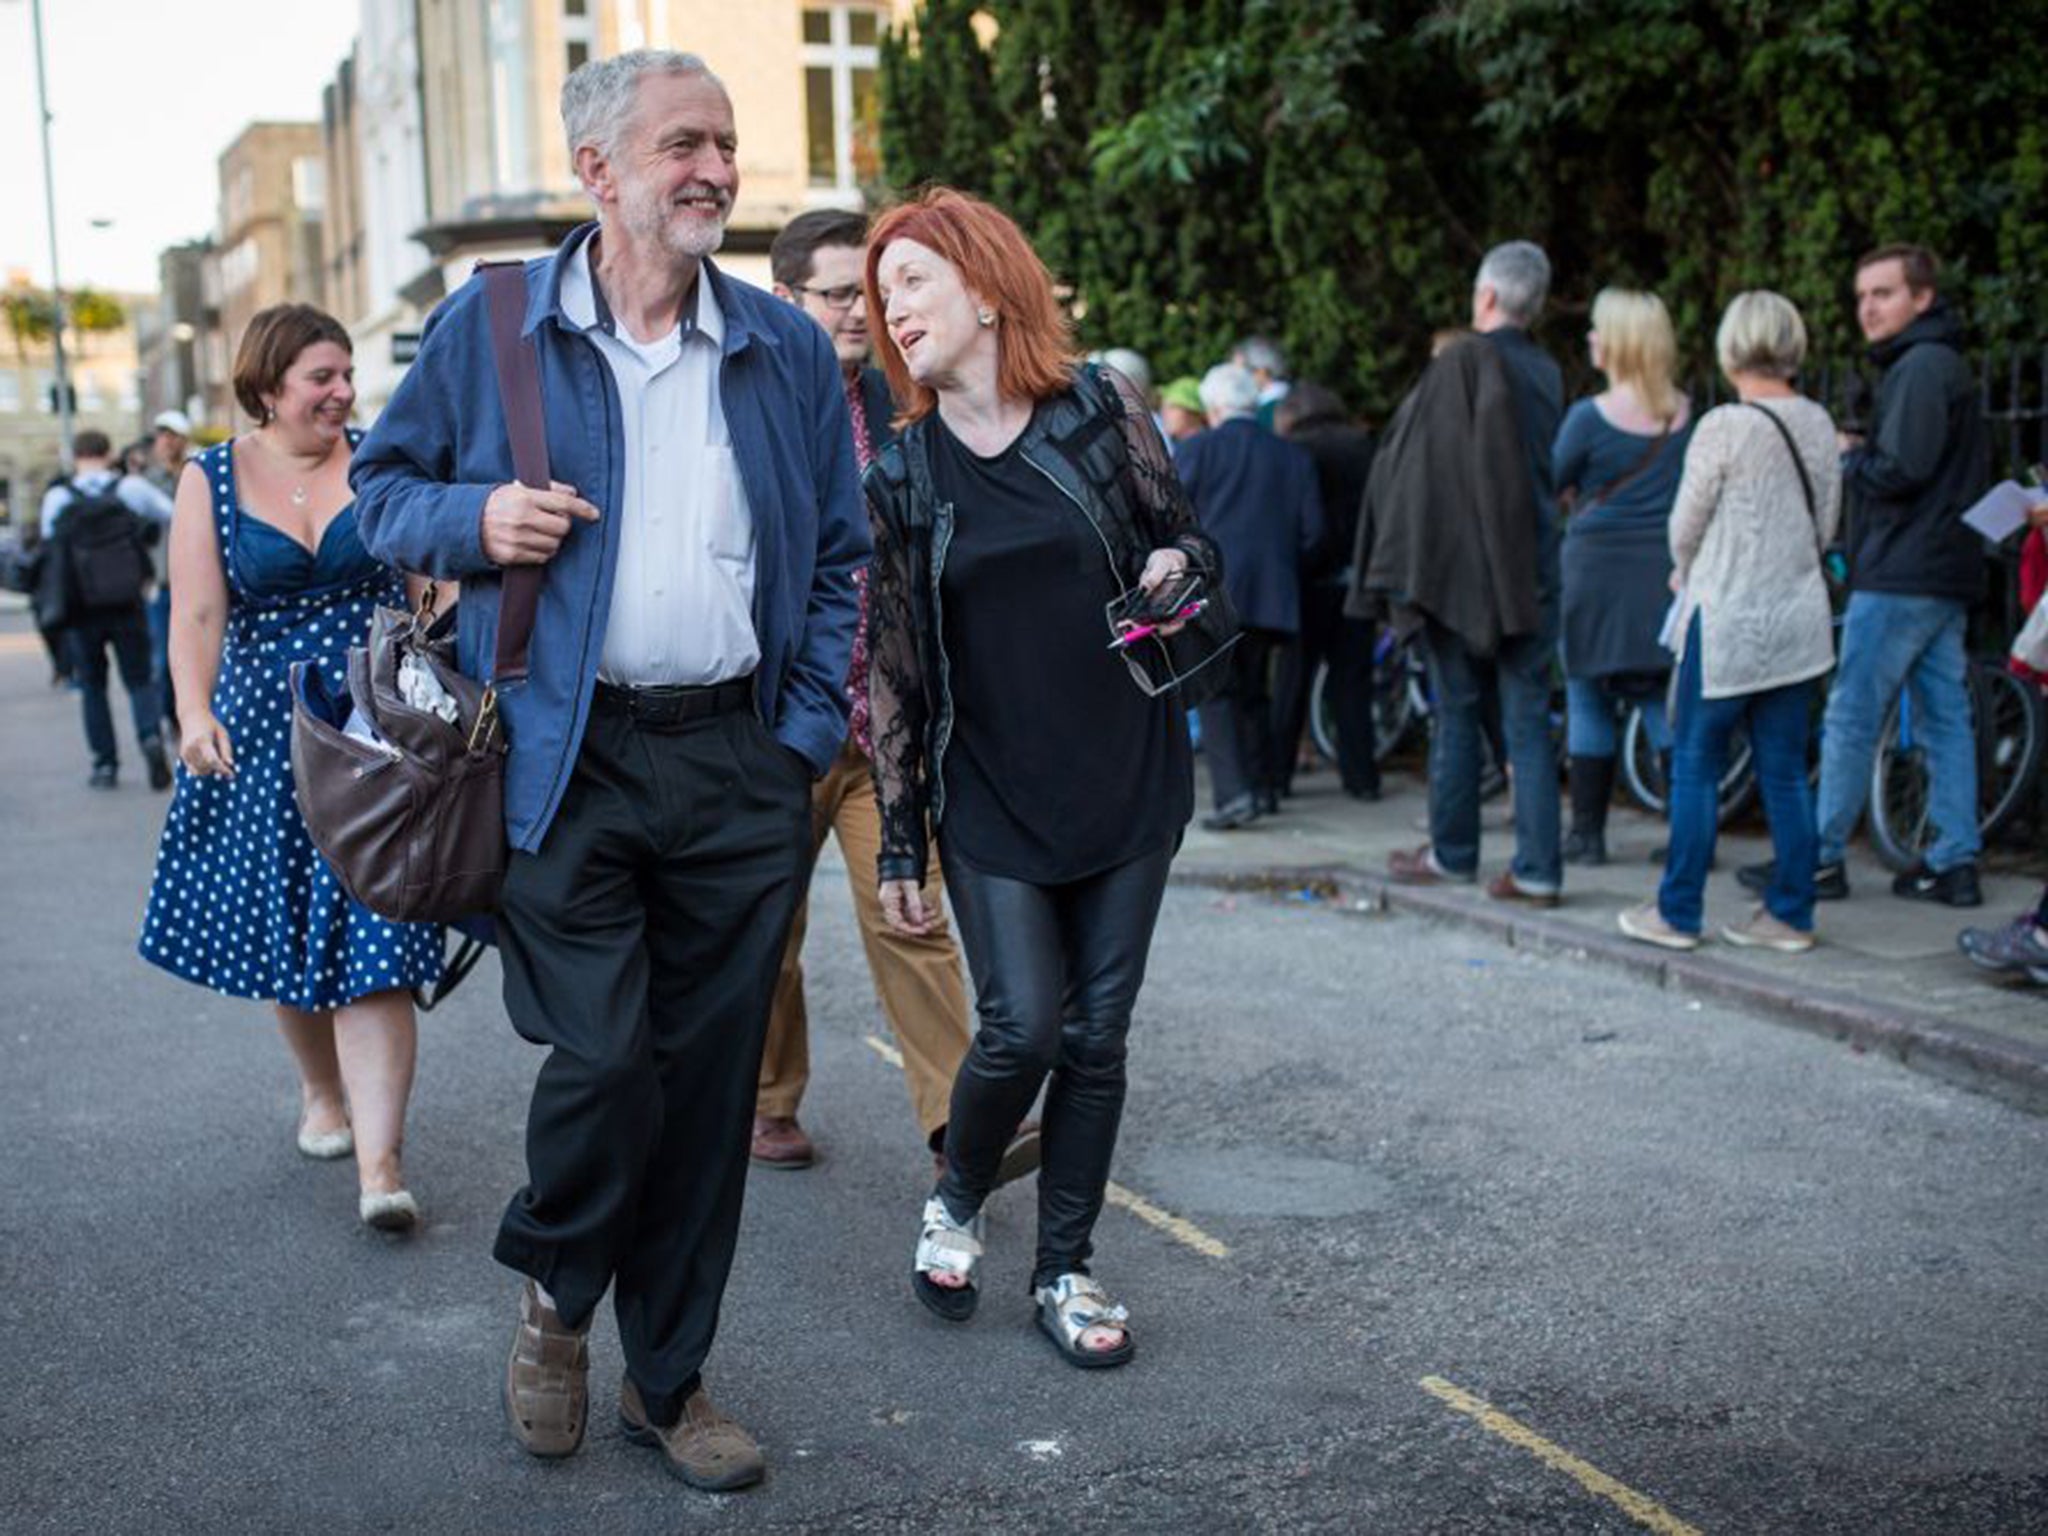 Jeremy Corbyn’s bold admission that he likes to photograph drain covers has put drains and the people who love them in the spotlight